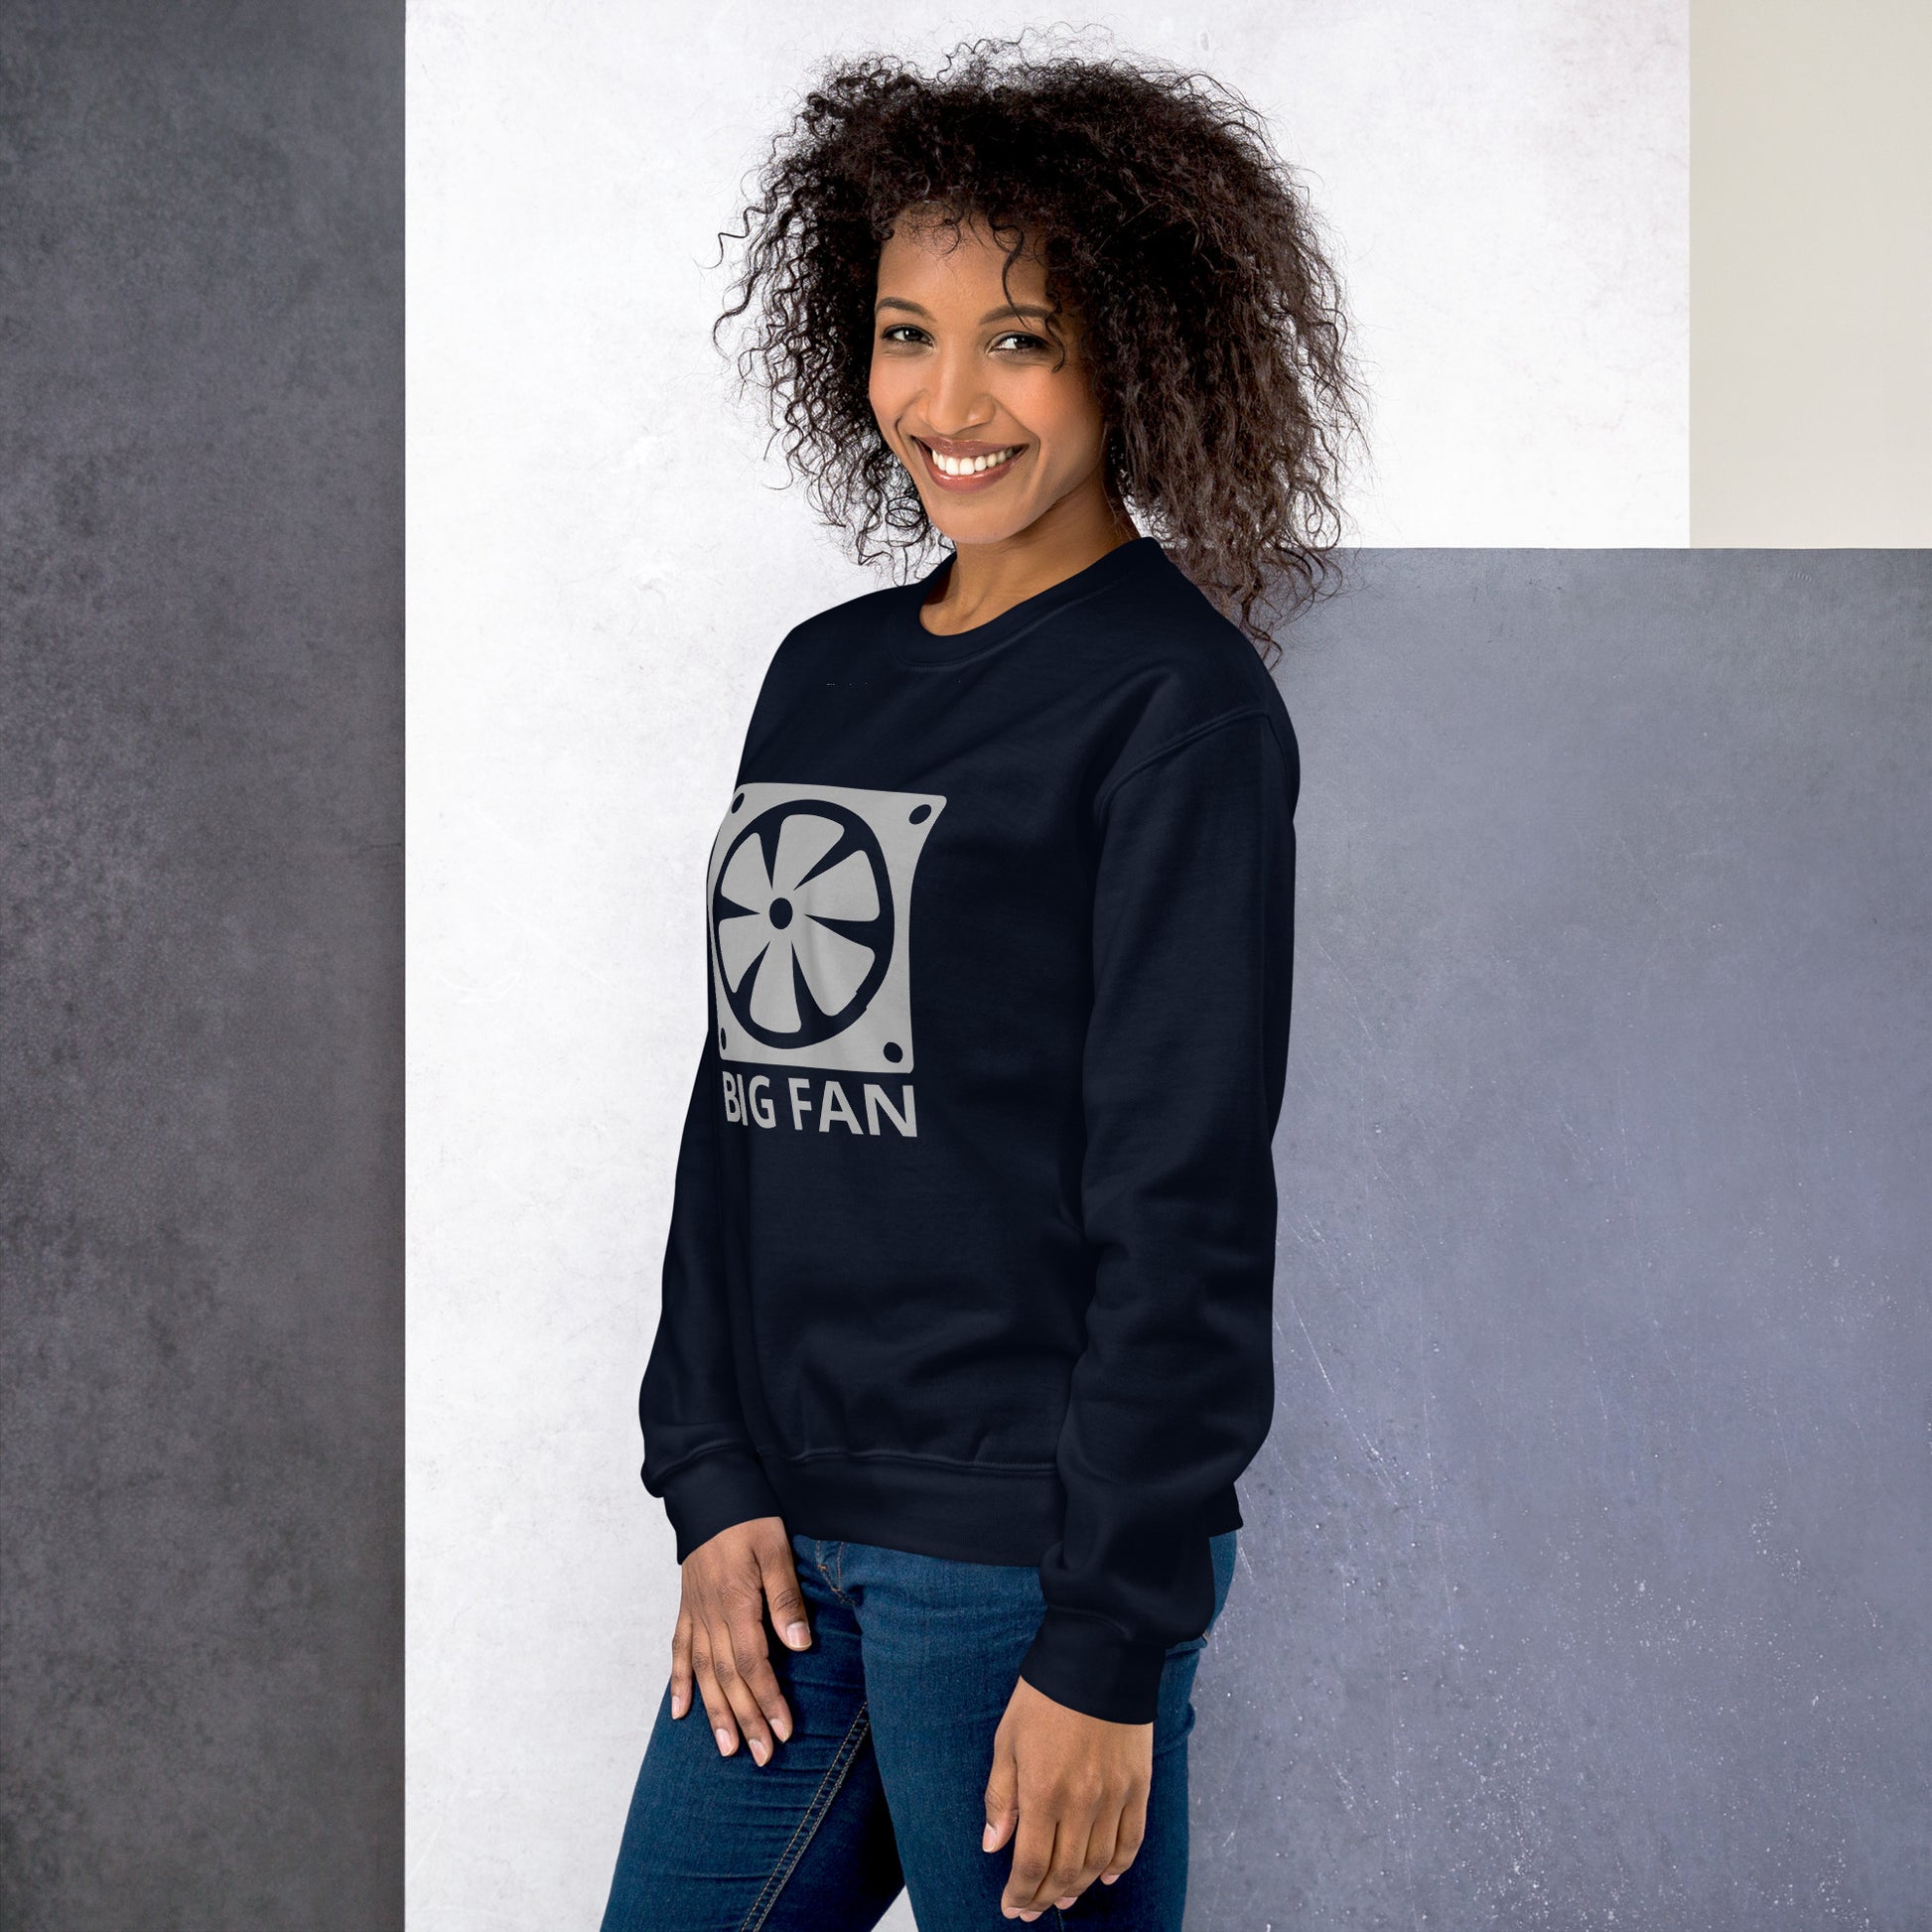 Women with navy blue sweatshirt with image of a big computer fan and the text "BIG FAN"